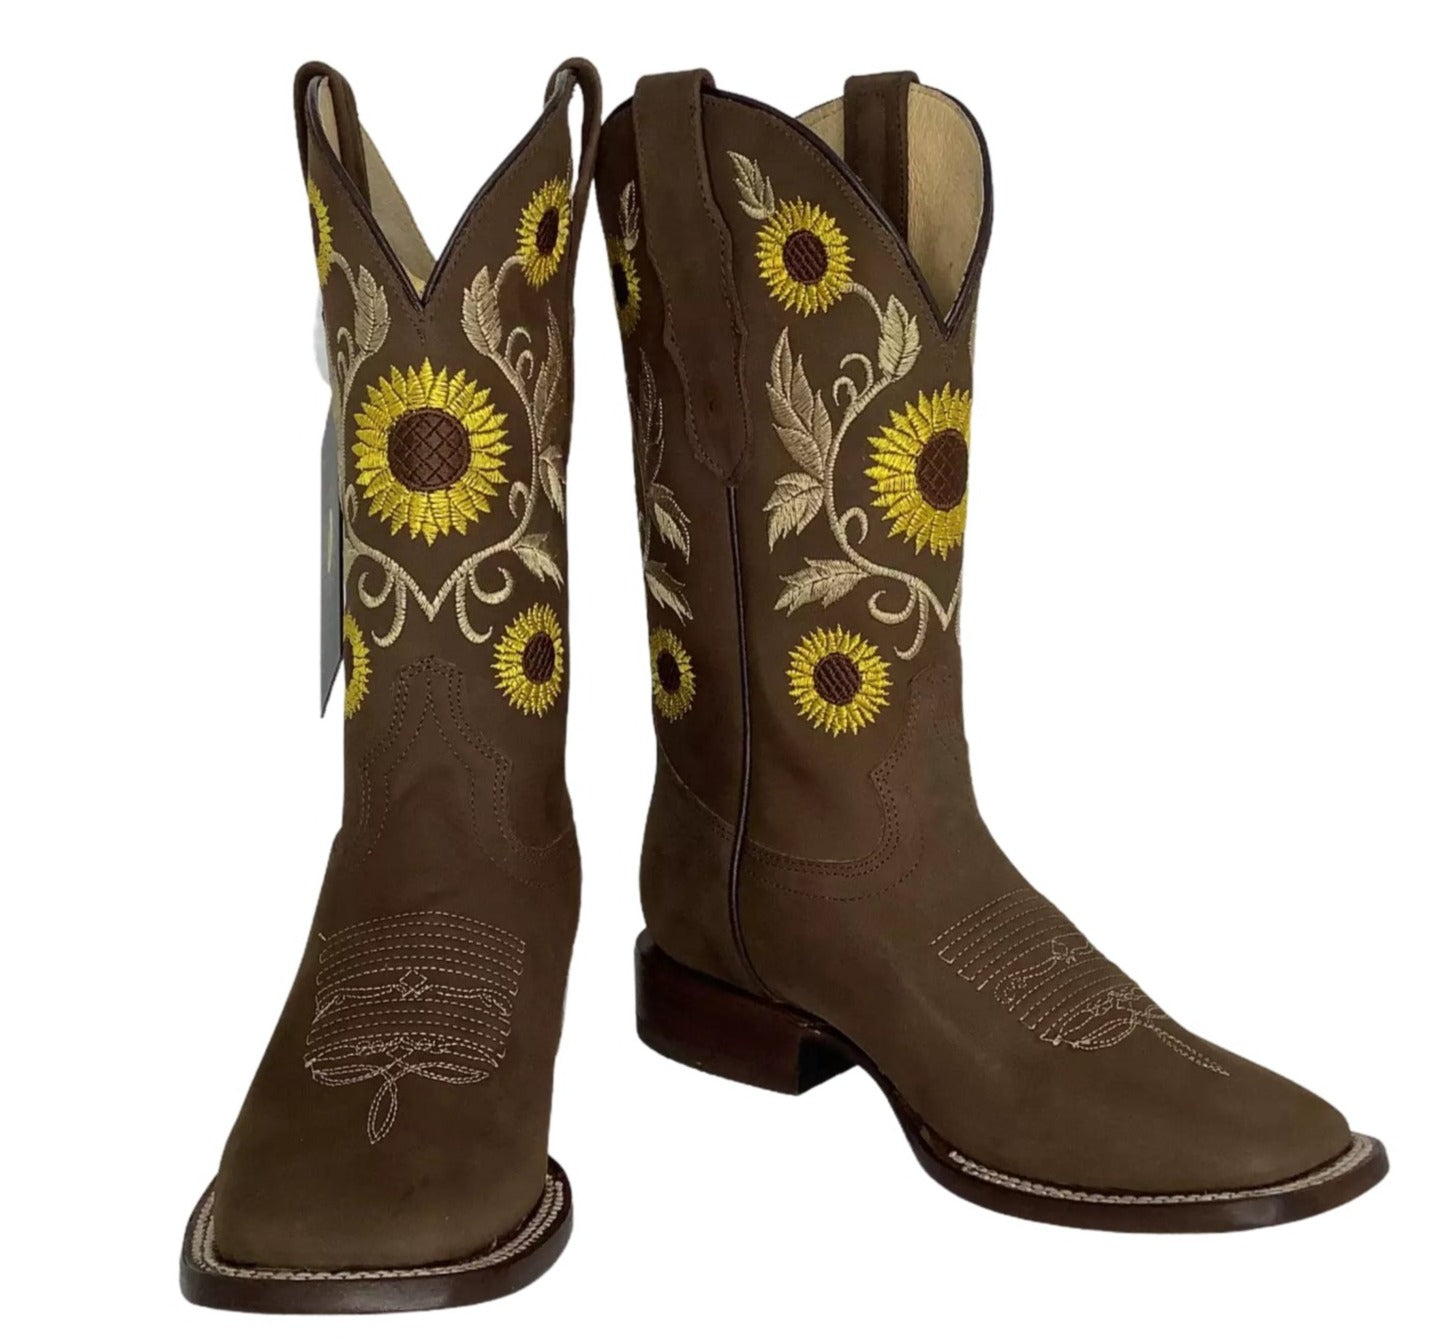 Honey Sunflower Cowgirl Boots